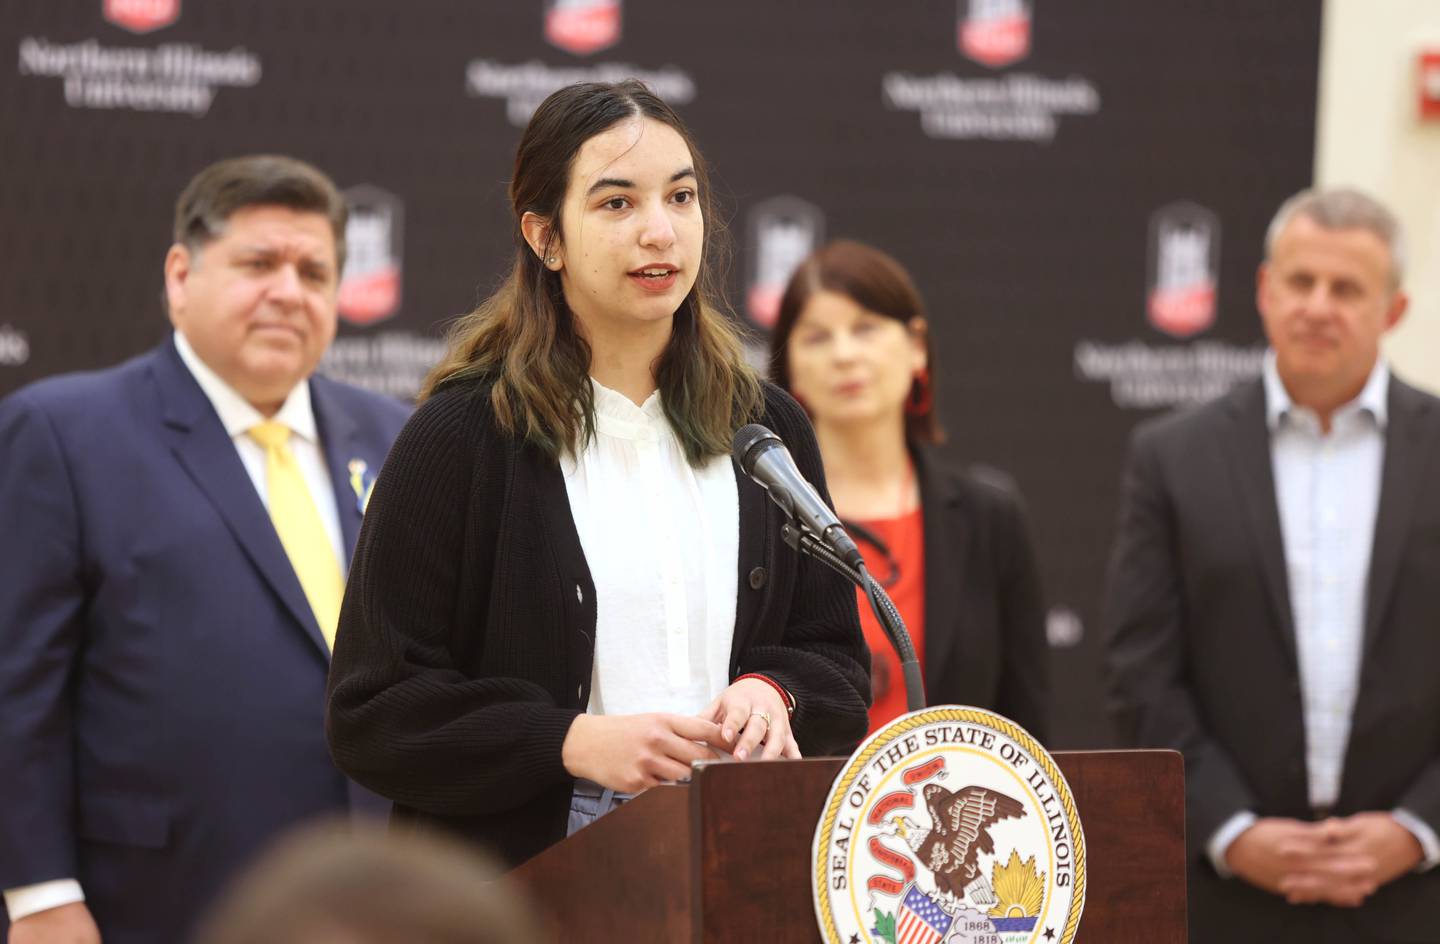 Northern Illinois University student Rebekah Gonzalez talks about her educational journey as Illinois Gov. JB Pritzker looks on Thursday, March 3, 2022, in the Barsema Alumni and Visitors Center at NIU in DeKalb. Pritzker was visiting NIU to talk about the importance of higher education and to tout the programs in Illinois that make that education more accessible to all.